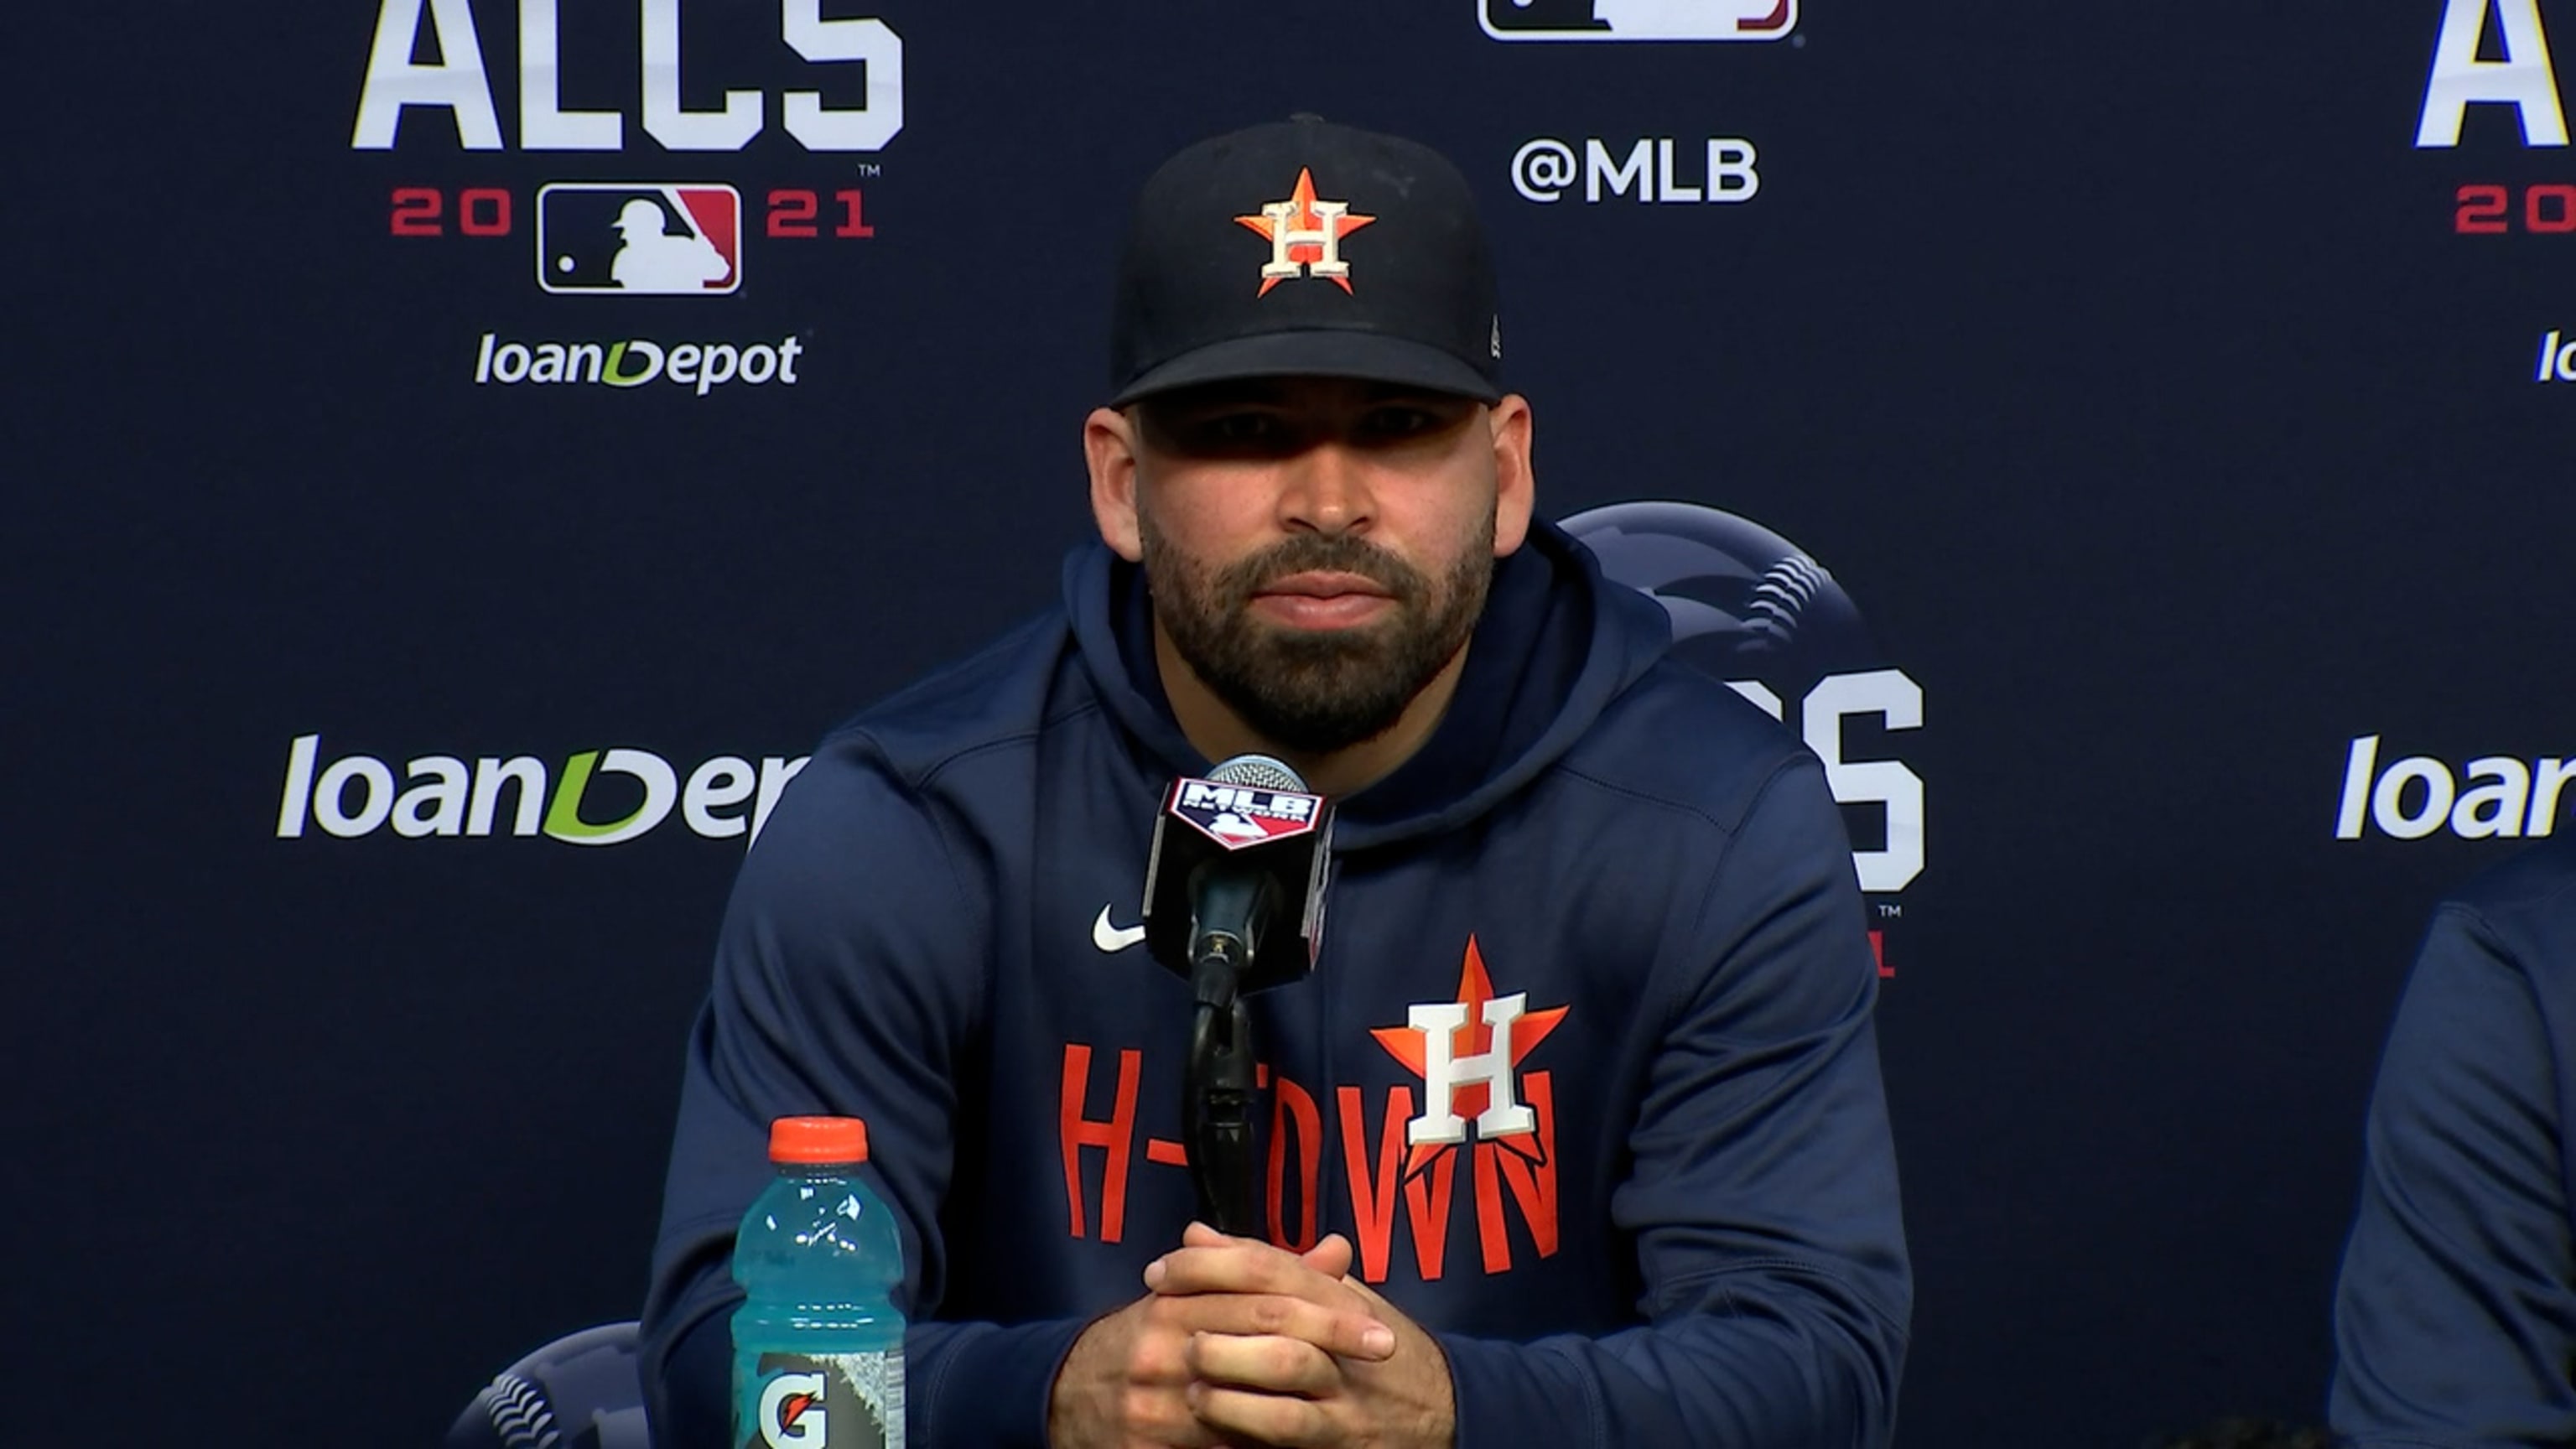 Astros' García exits ALCS Game 2 early with knee injury